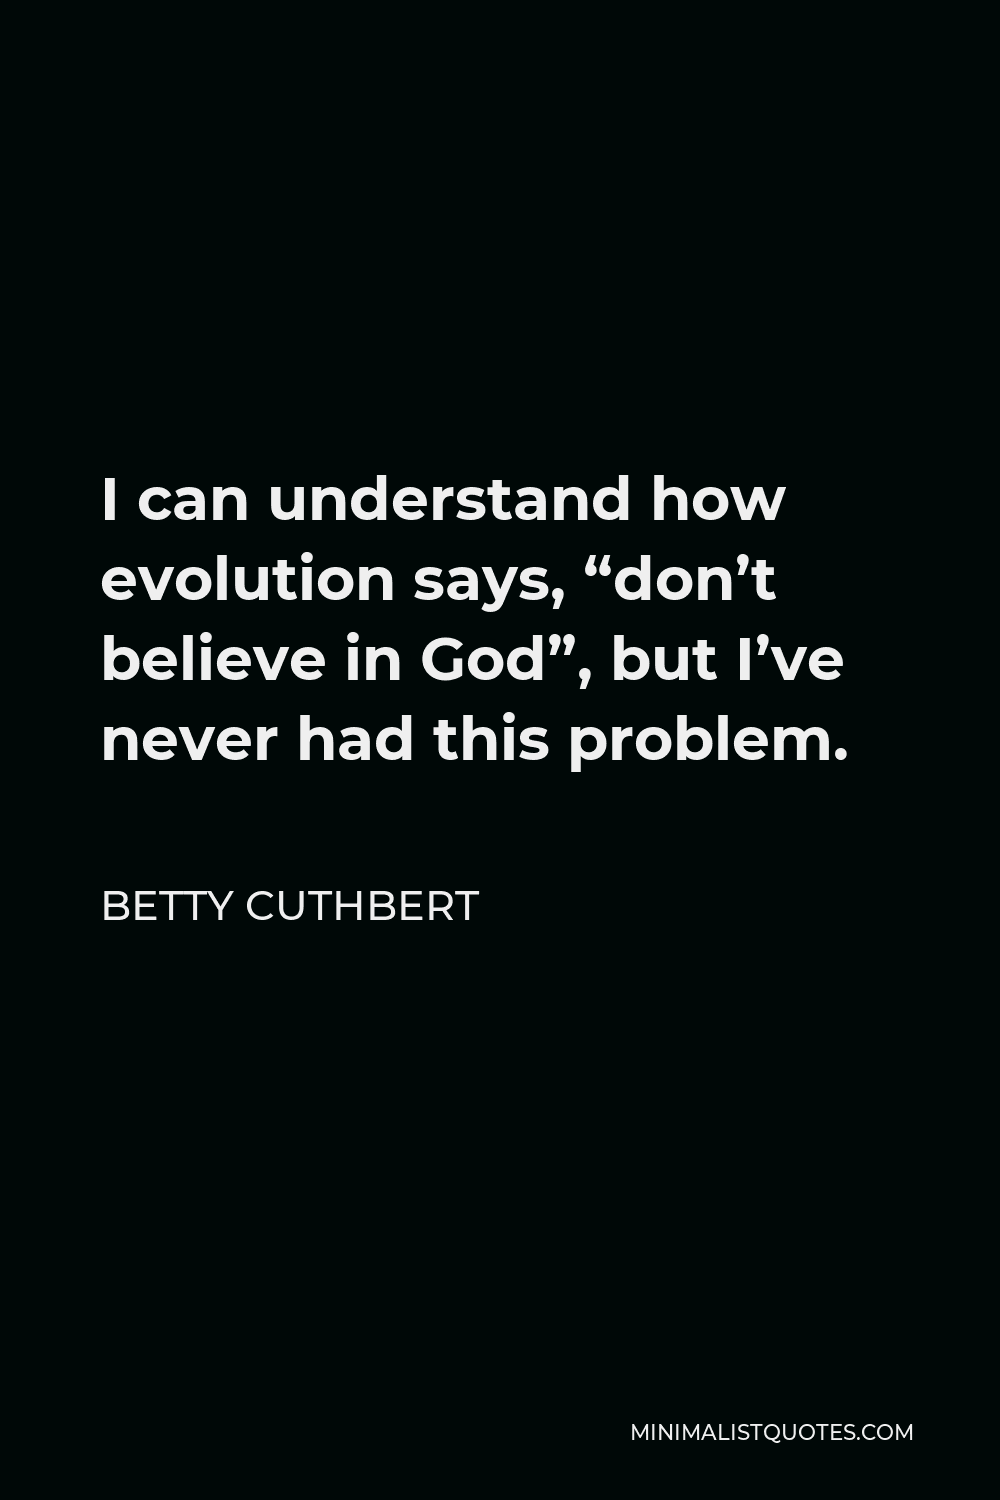 Betty Cuthbert Quote - I can understand how evolution says, “don’t believe in God”, but I’ve never had this problem.